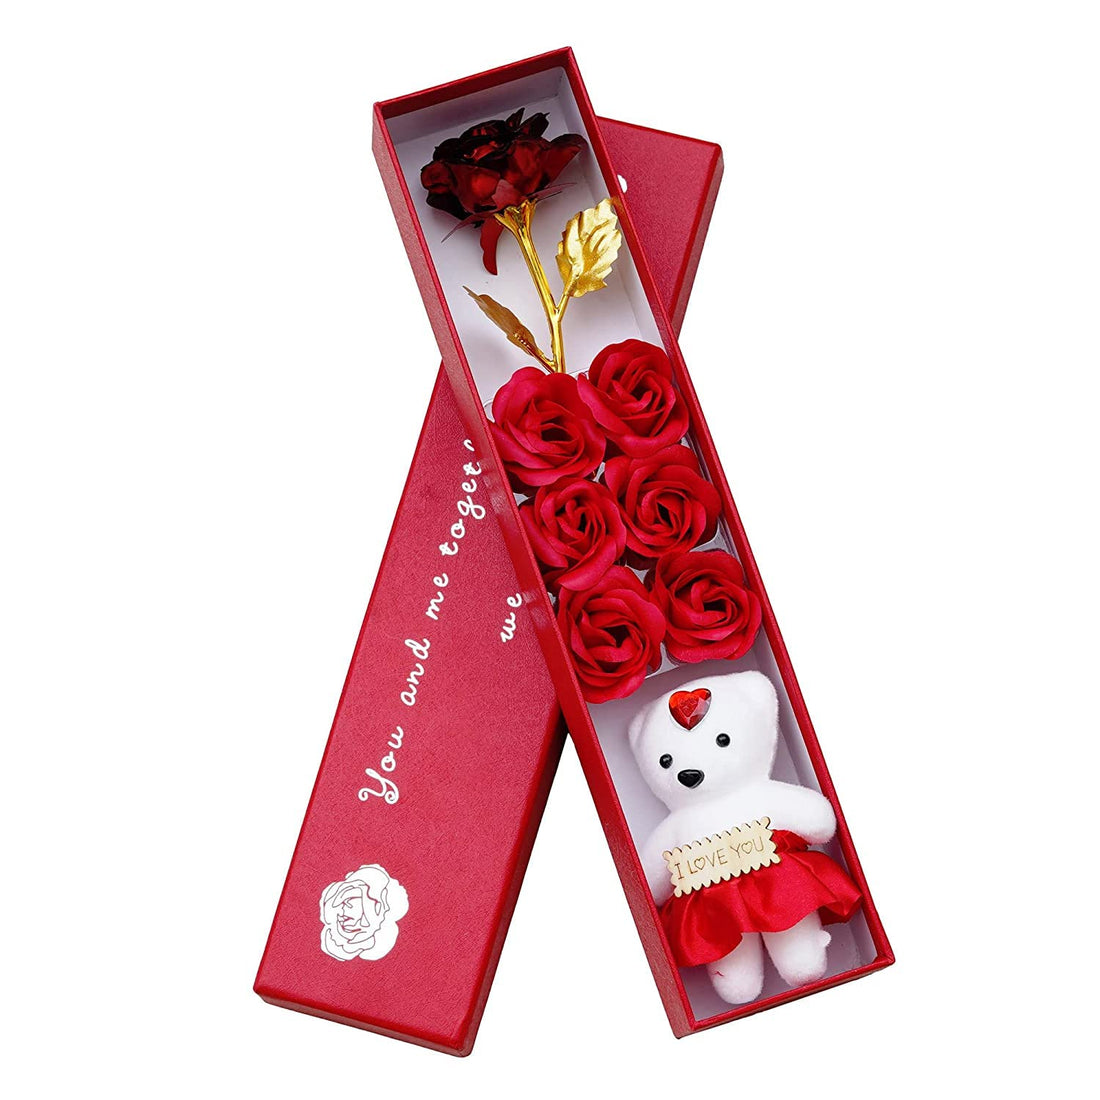 Premium Rose Flower with Teddy & Rose Petals in Luxury Gift Box